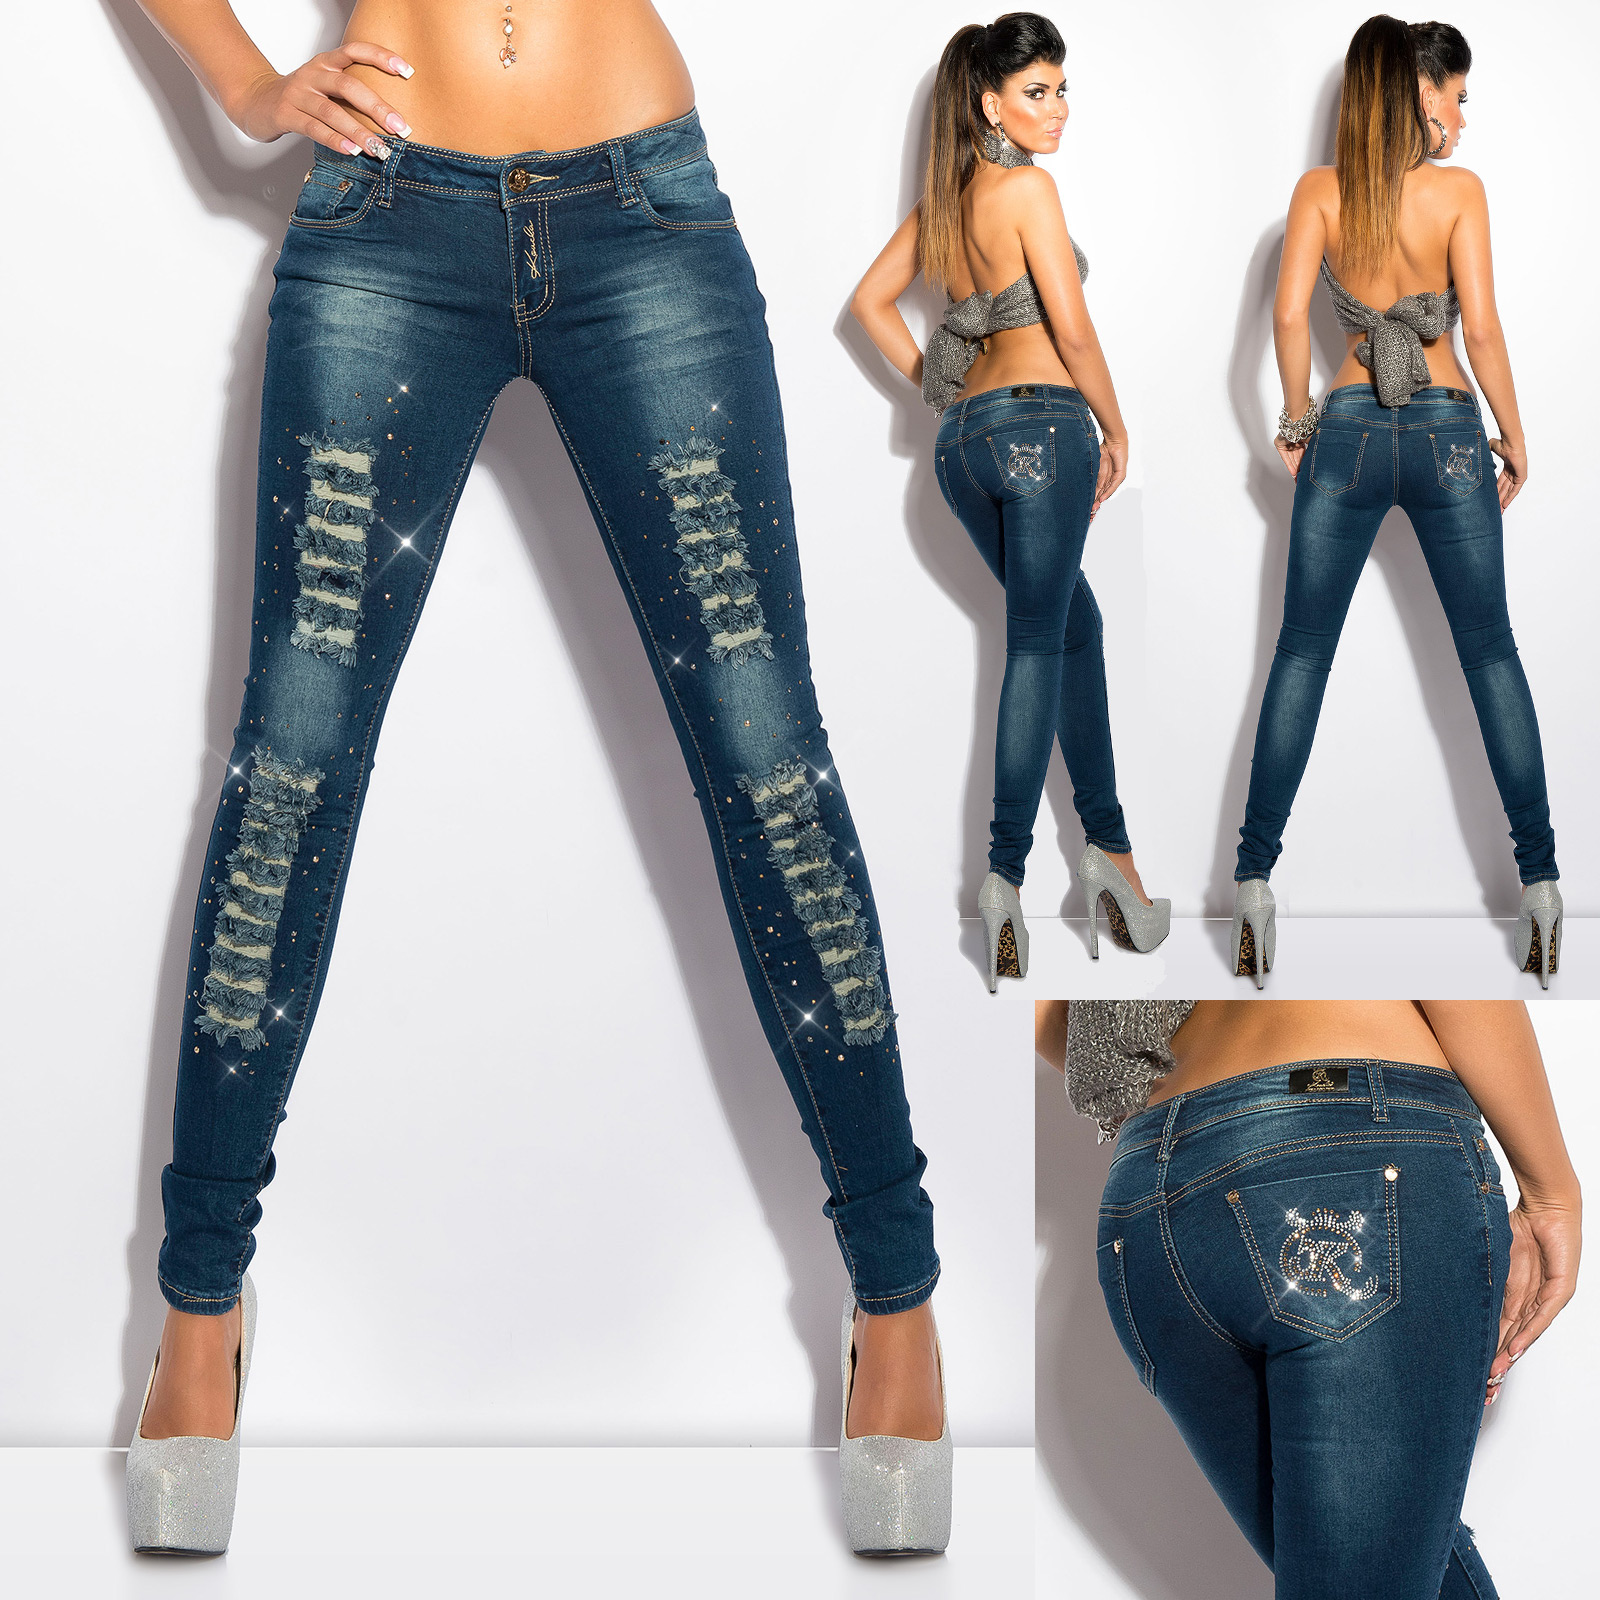 extra low rise jeans